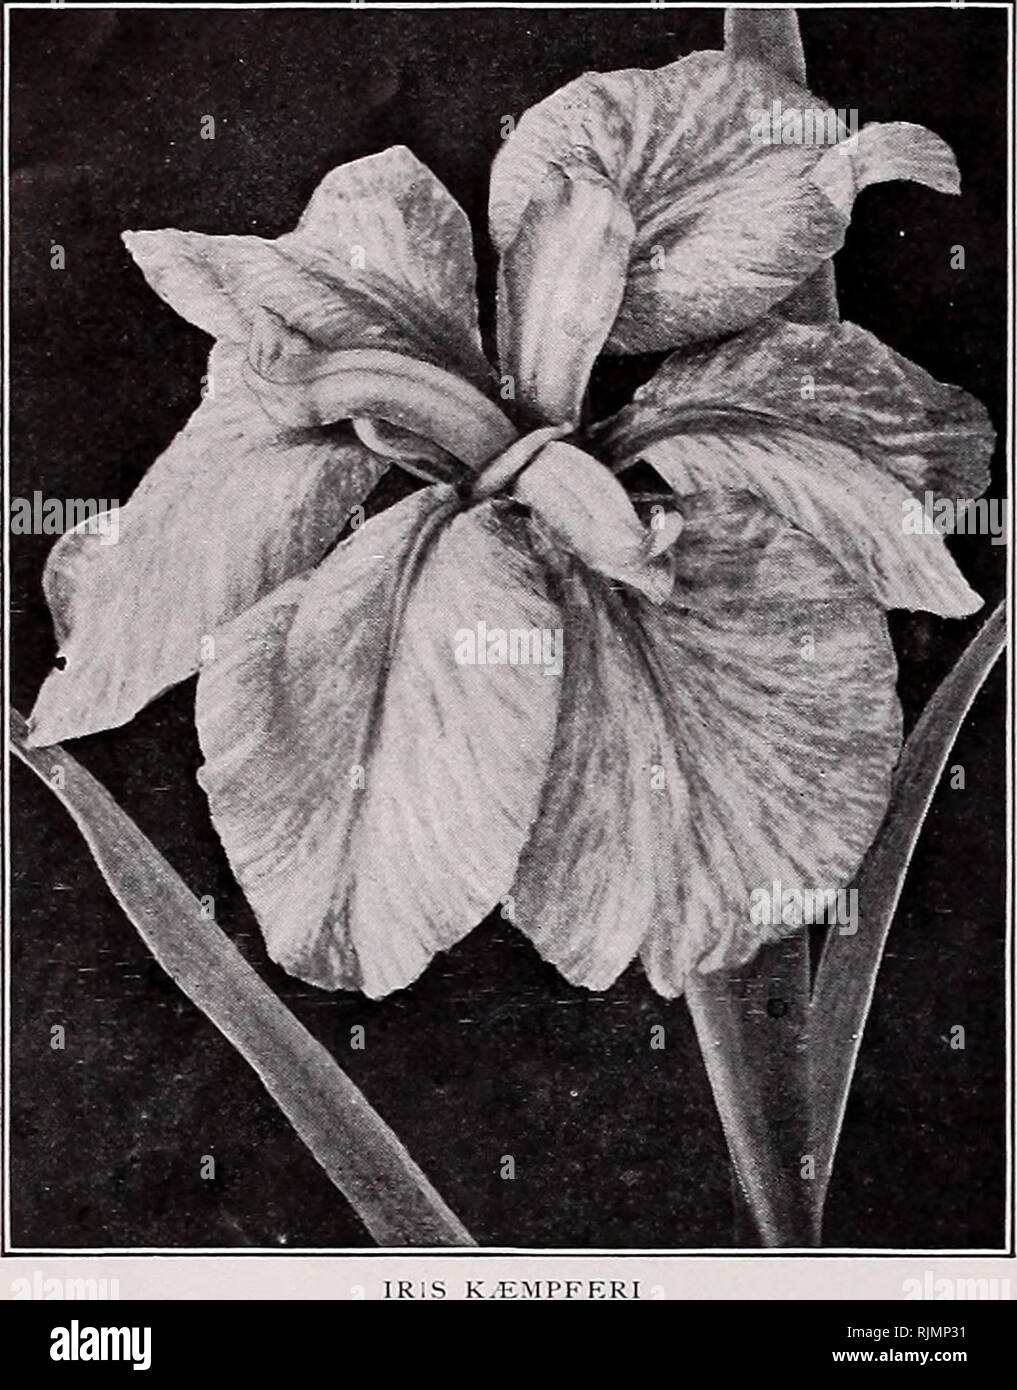 . Beckert's bulbs and seeds for fall planting. Commercial catalogs Seeds; Bulbs (Plants) Seeds Catalogs; Flowers Seeds Catalogs; Garden tools Catalogs. 16 W. C. Beckert's Autumn Catalogue of Bulbs and Seeds, N. S., Pittsburg, Pa.. Various Bulbous Iris, continued Each Doz. Histrioides. Something like the preceding in color, with addition of white spots on the falls of flowers; color varies somewhat. Early blooming $o lo $i oo Sindjarensis. Beautiful pale blue, vanilla-scented flowers. Is quite hard}', but protection should be given. A nice variety for pots 15 i 50 Bearded Iris, with Rhizomatous Stock Photo